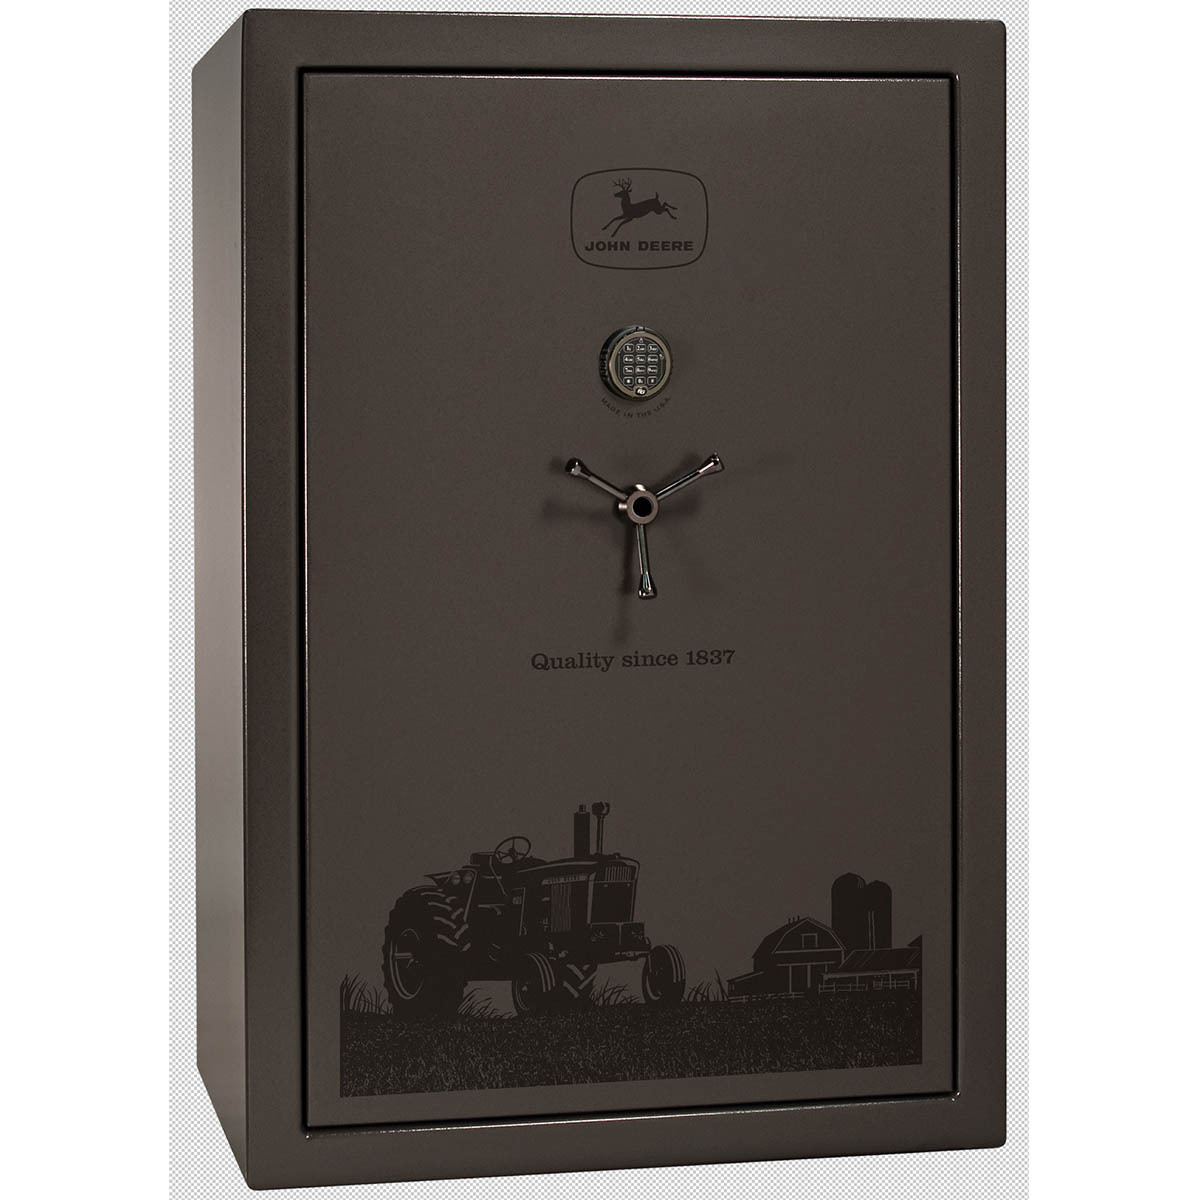 Specialty Series - 64 Gray Marble Security Safe